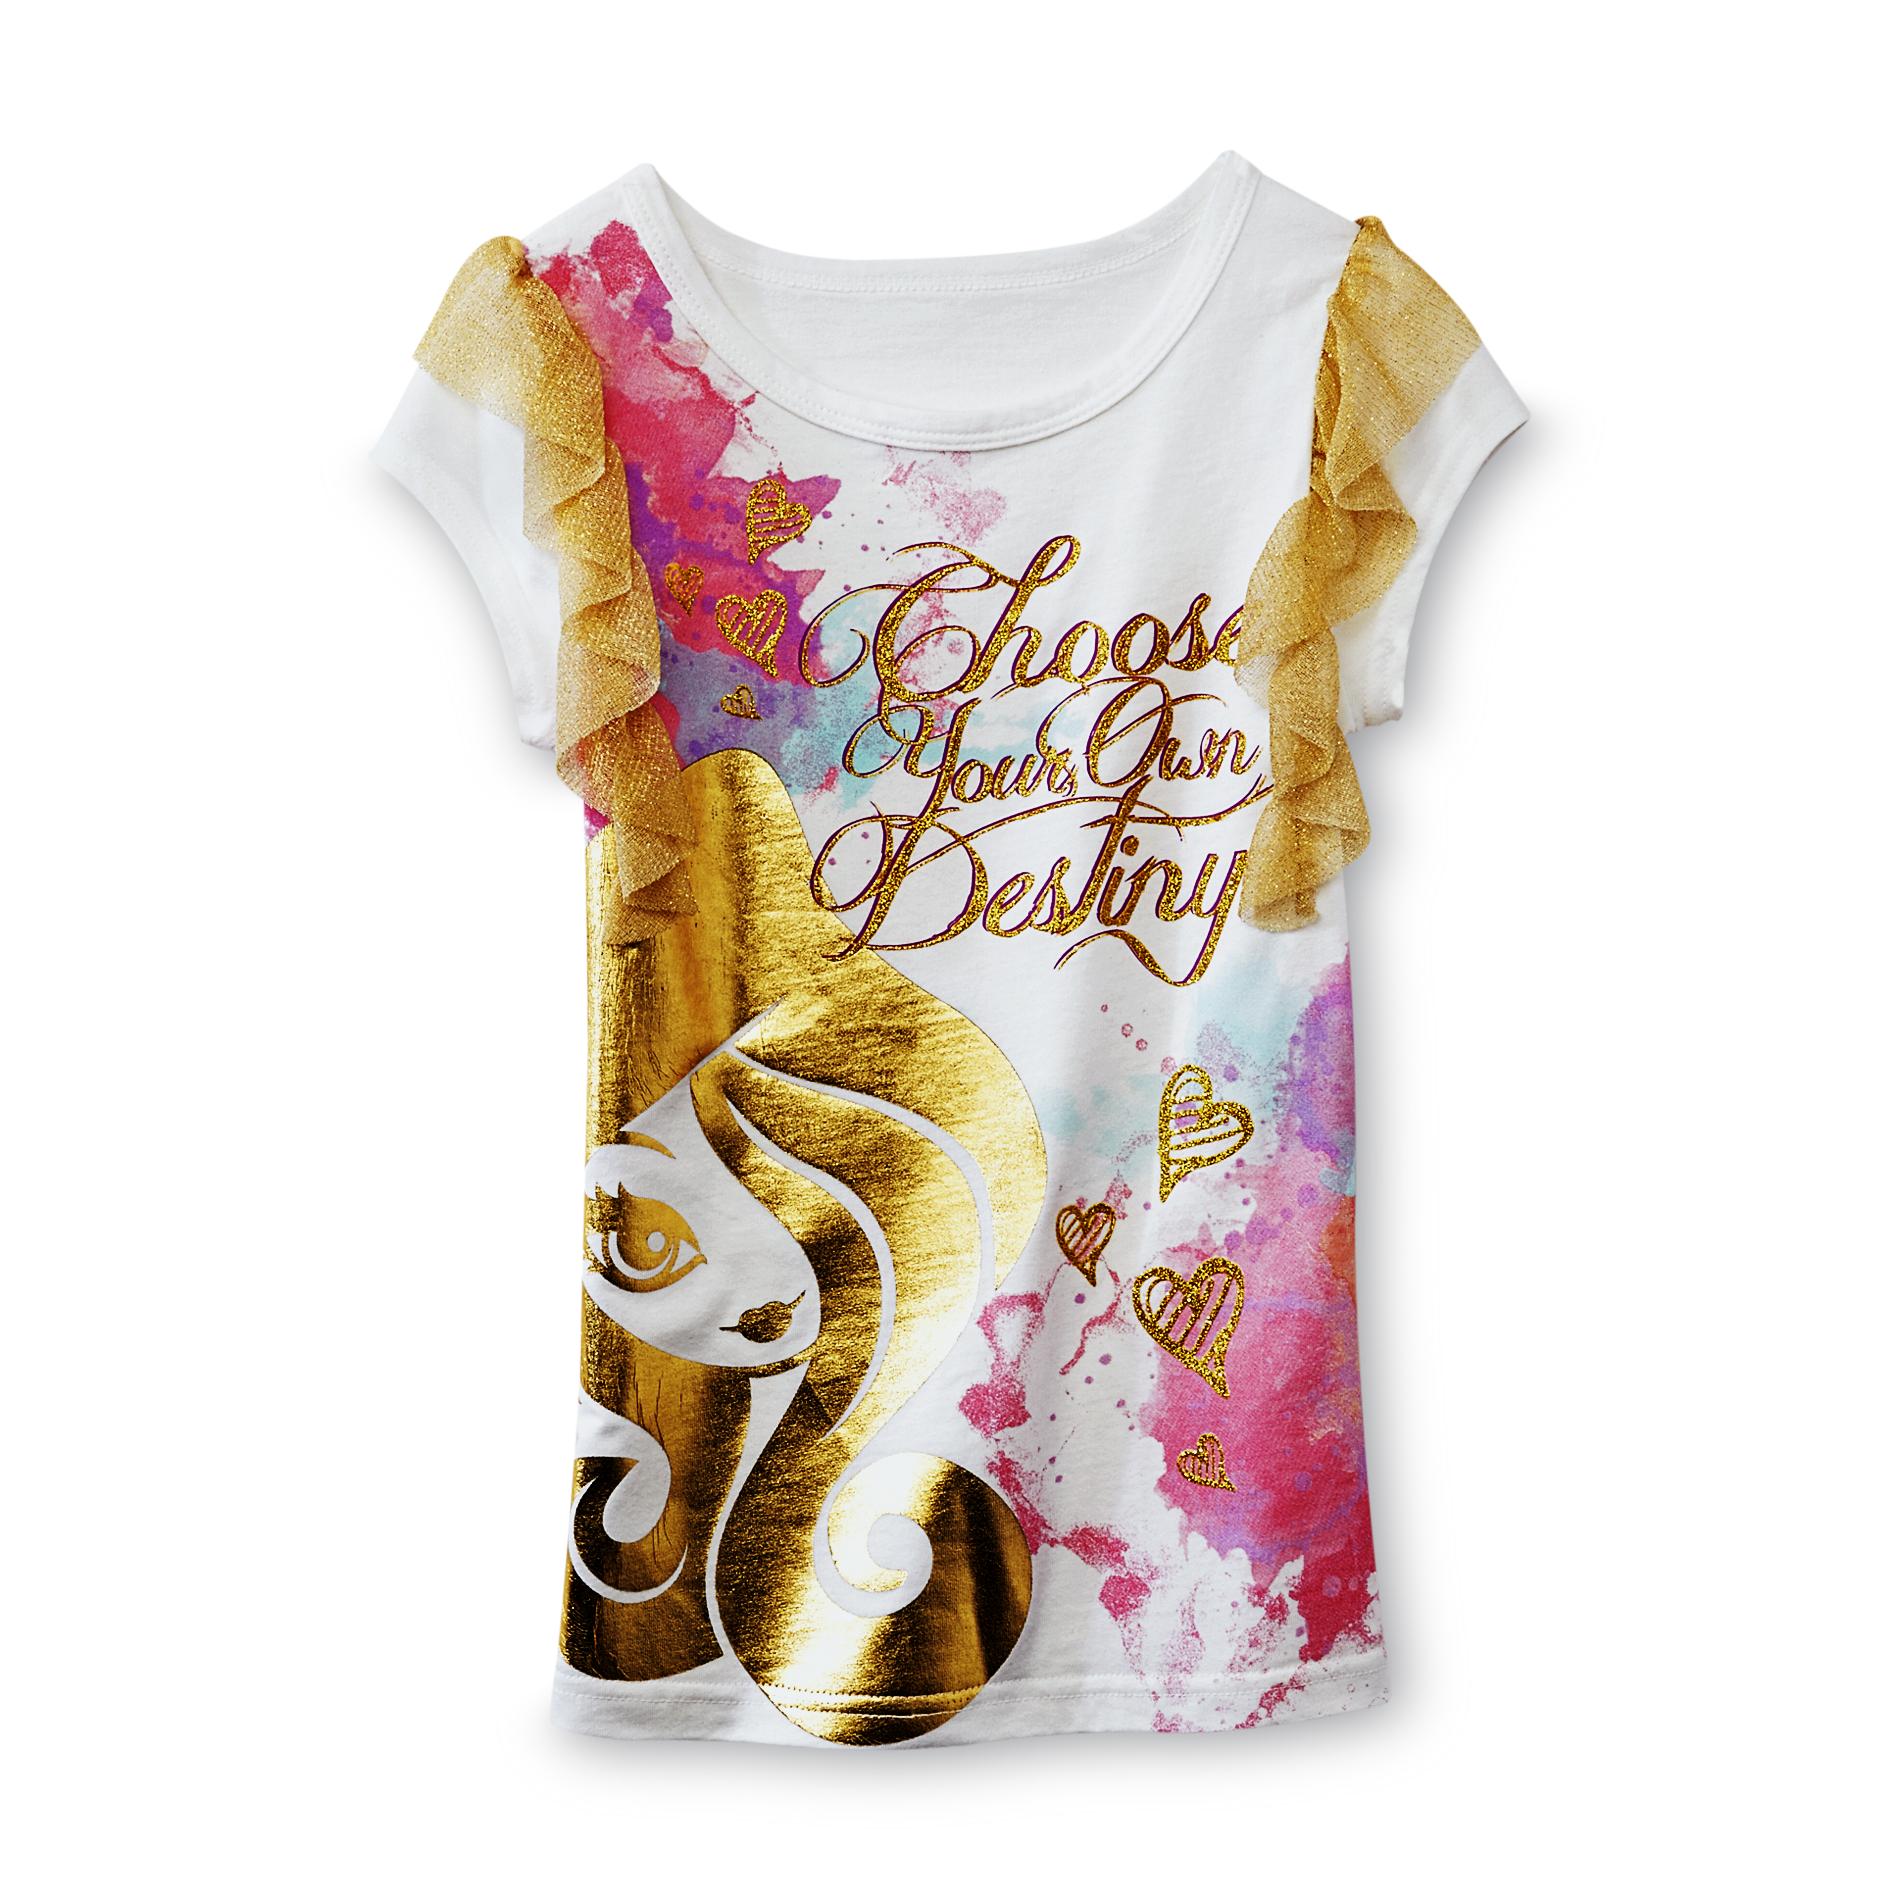 Ever After High Girl's Scoop Neck Top - Destiny